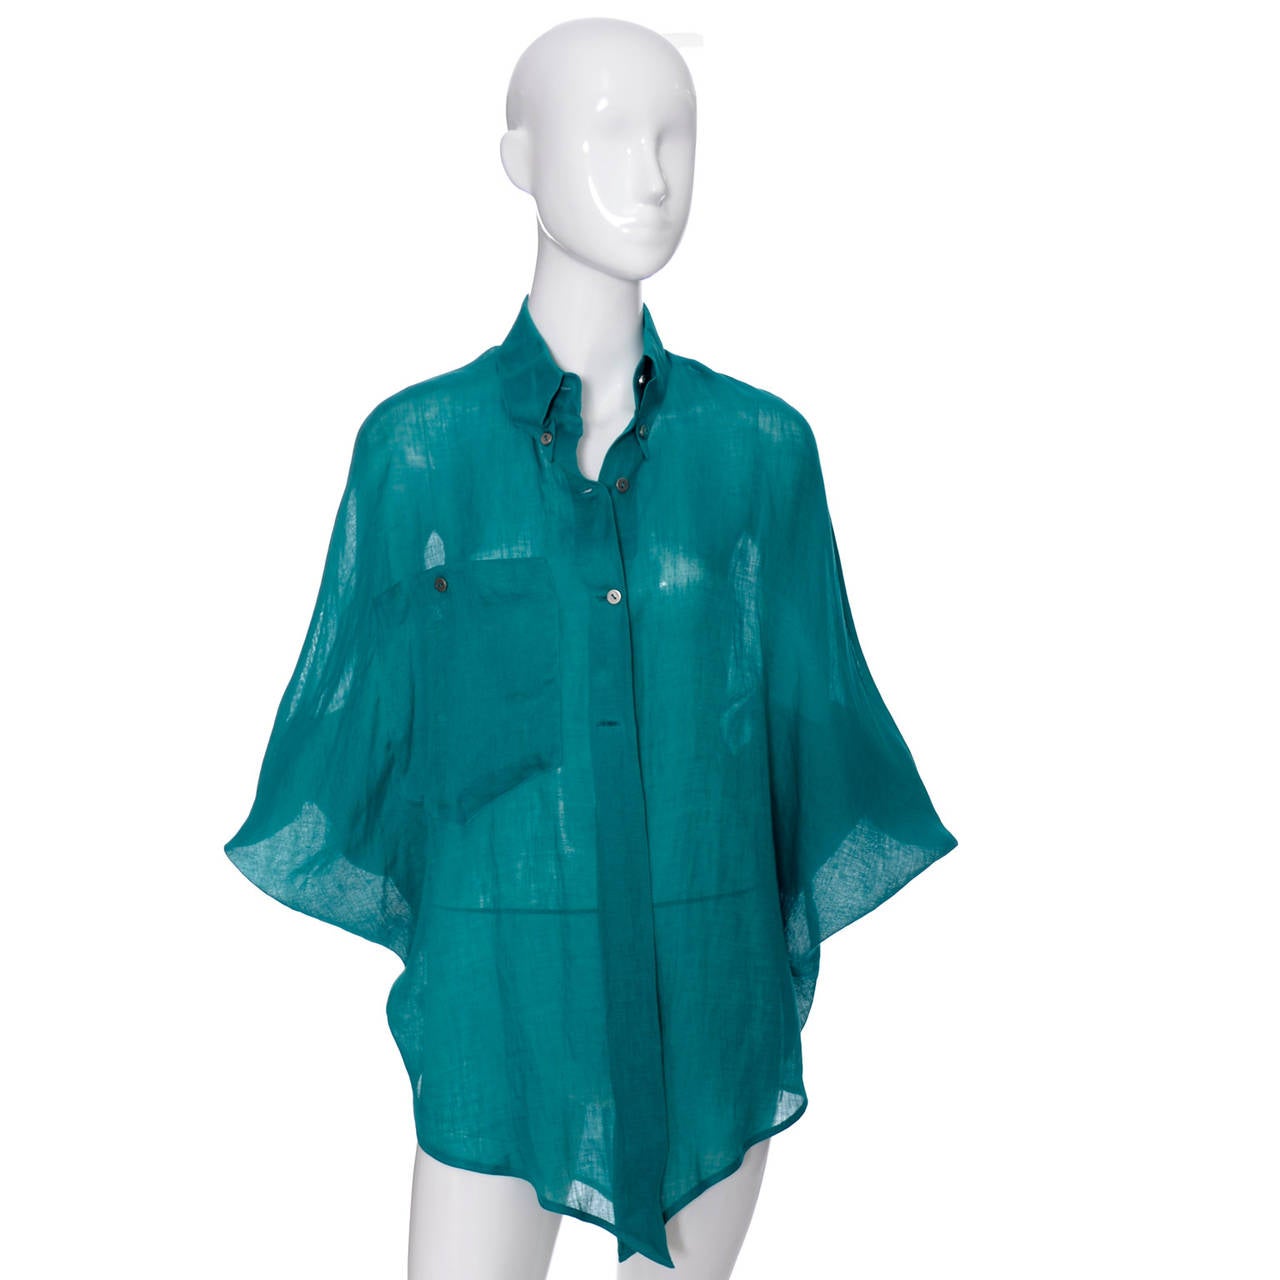 This Claude Montana teal vintage linen shirt was made in Italy in the 1980's. It is in mint condition, most likely never worn, and comes from an estate that had only the finest vintage designer clothing from the 1970's and 1980's.  This blouse